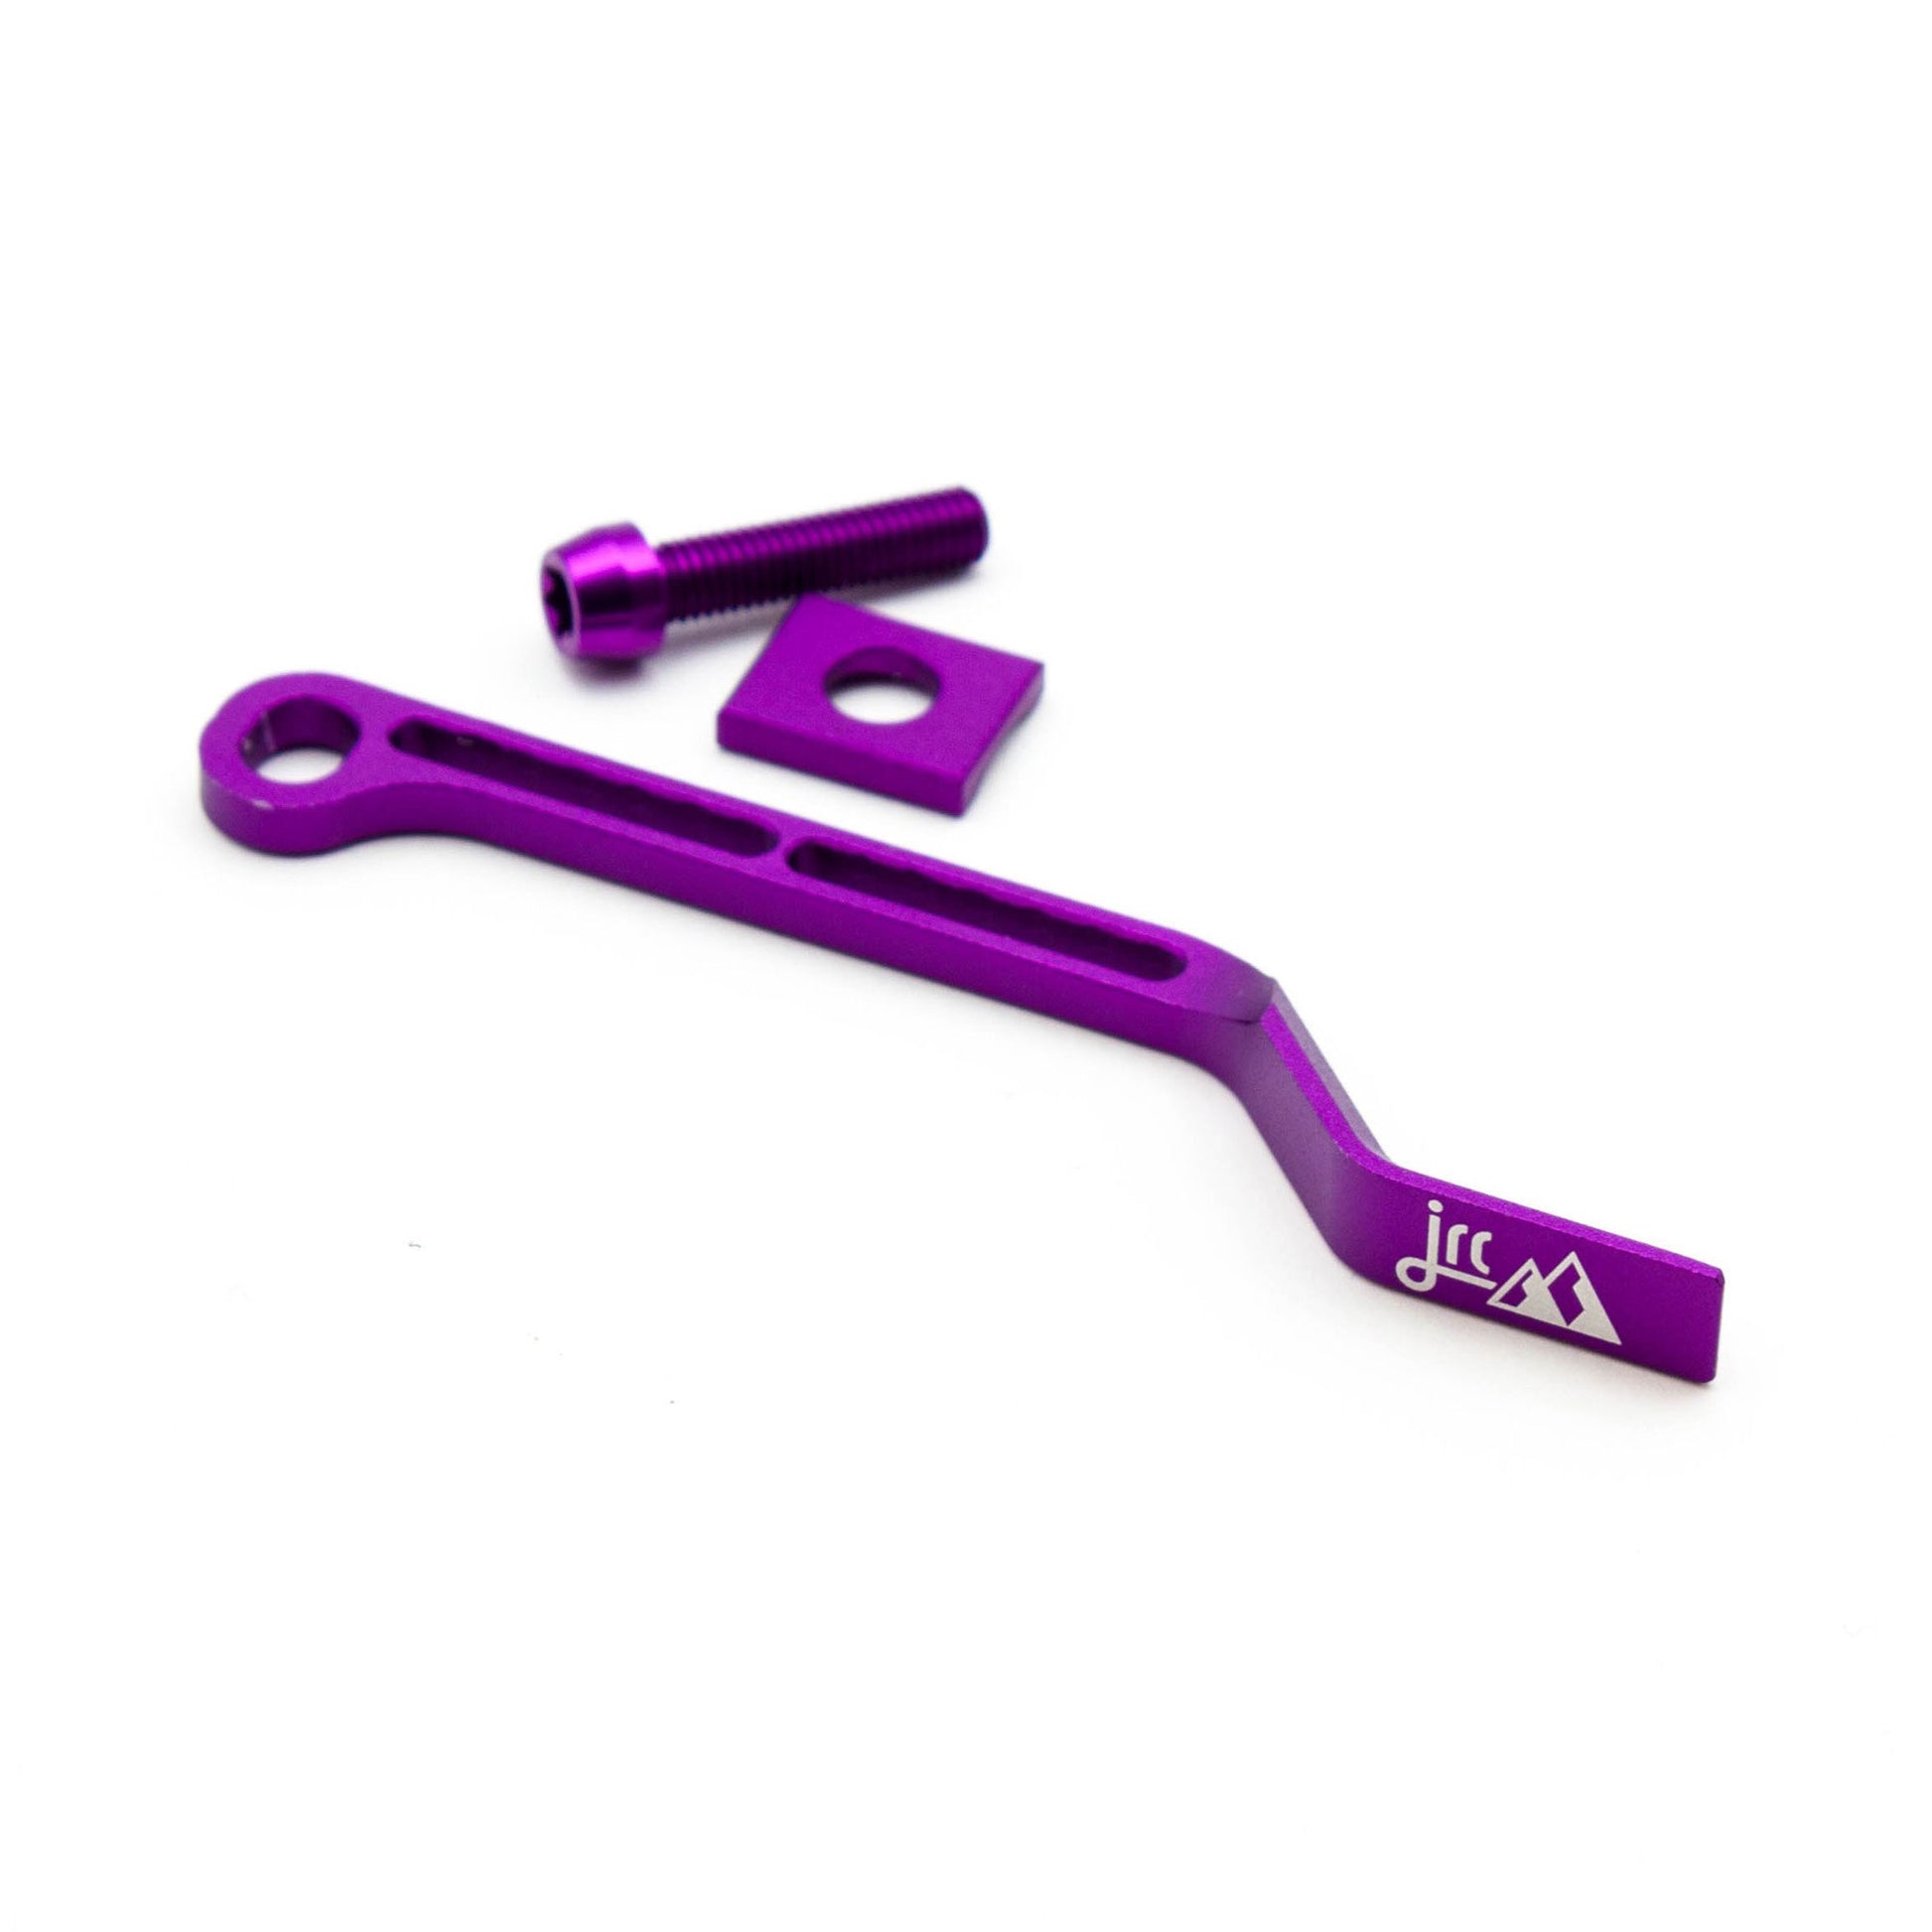 Purple, lightweight aluminium bicycle chain catcher kit with alloy mounting bolts and braze-clamp spacer